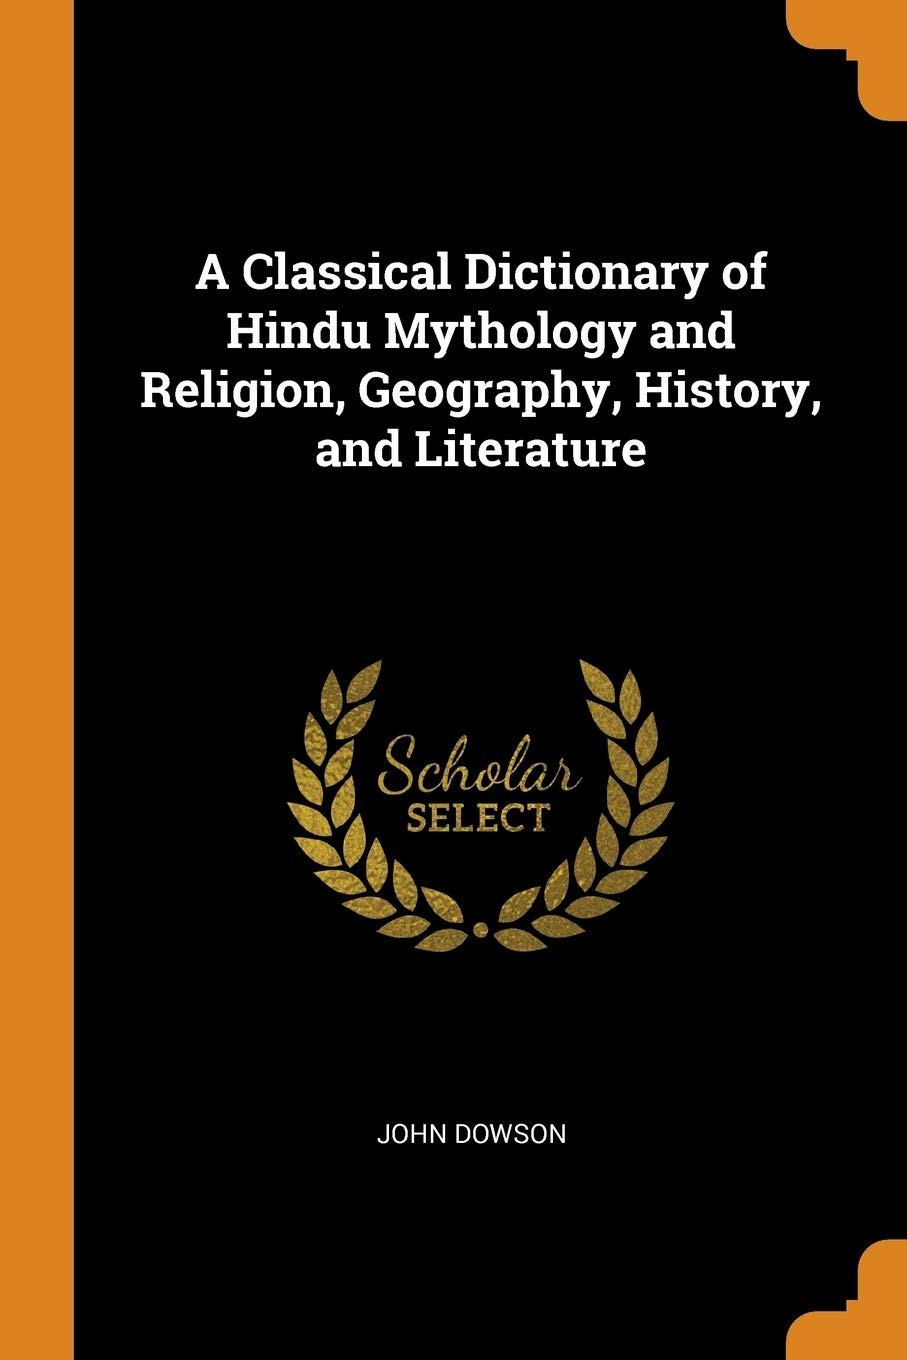 A Classical Dictionary of Hindu Mythology and Religion: Geography, History and Literature